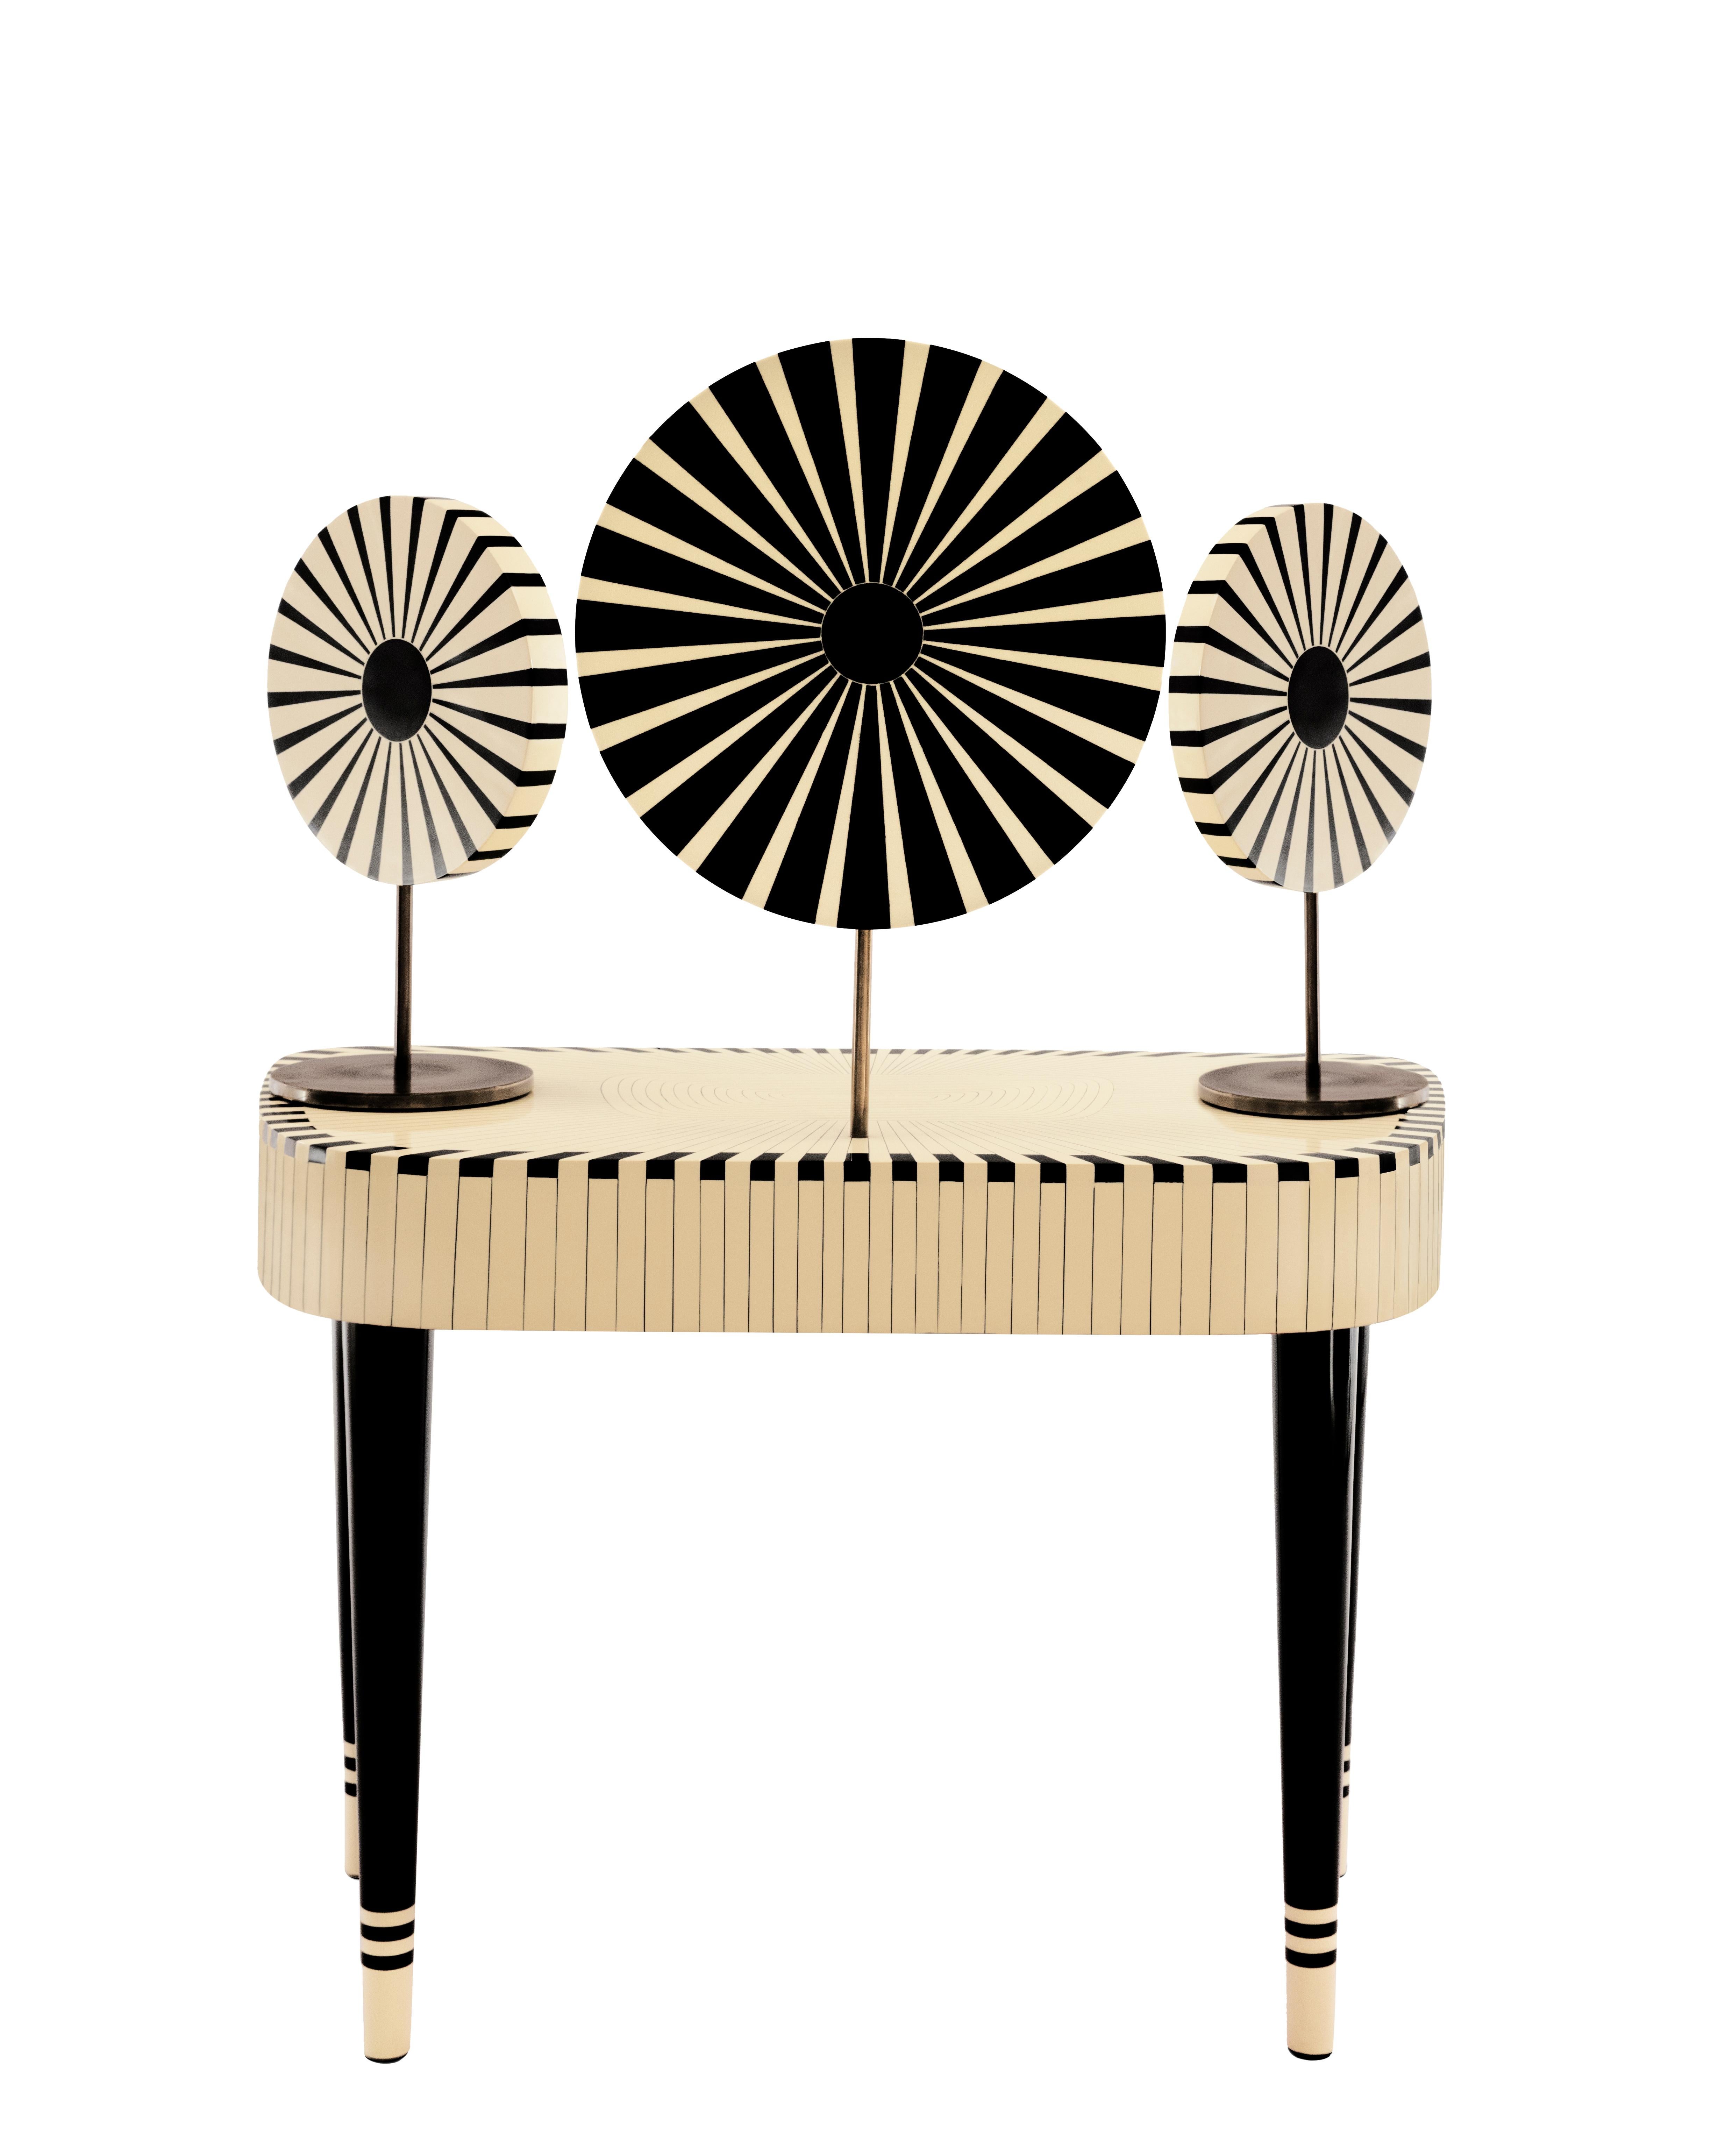 Woman in Paris Vanity Table by Matteo Cibic is a stunning dressing table with two drawers and three mirrors, two of which can be moved to desired angles. It is available in a range of colors, which can be customized according to the space.

India's